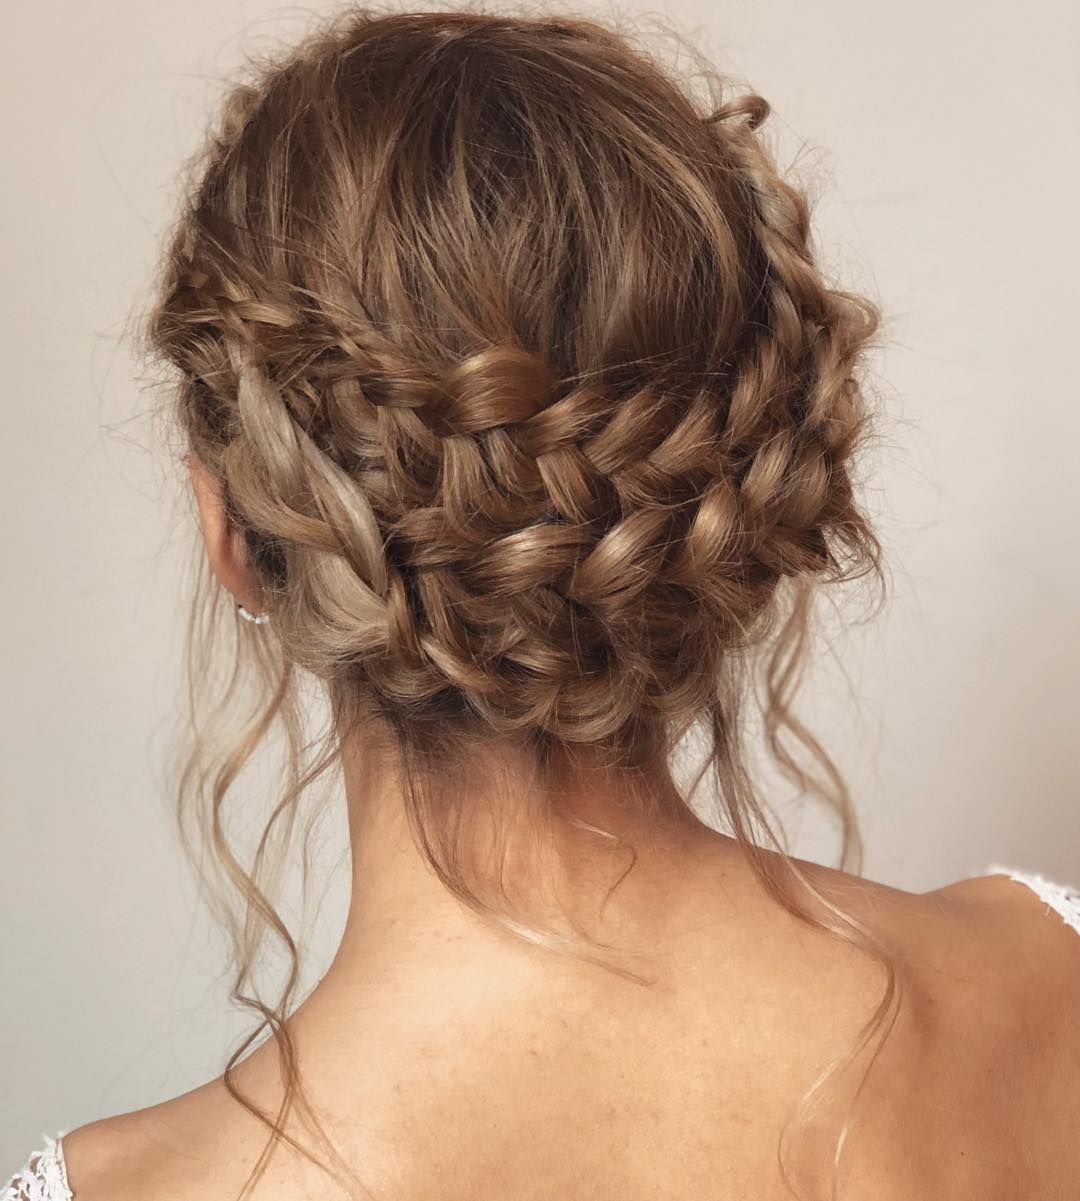 Knotted Crown Hairstyle